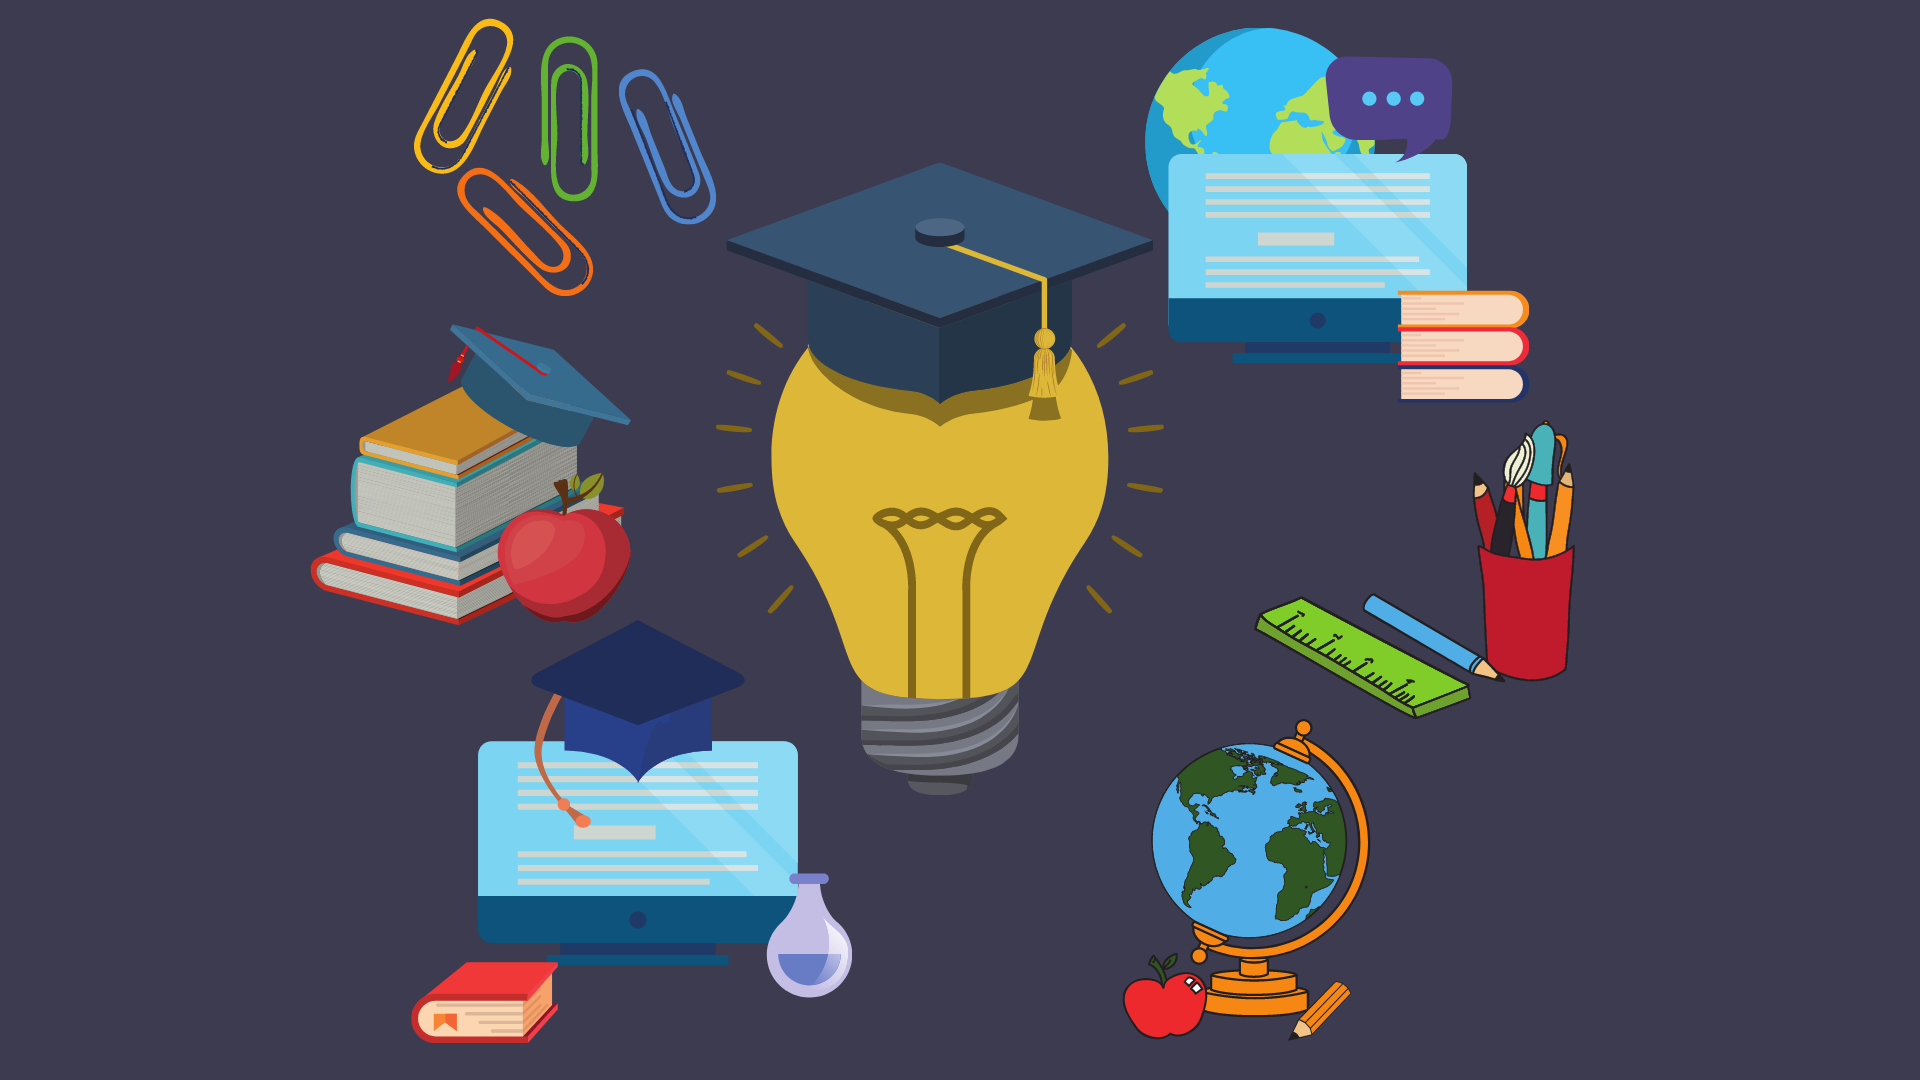 Illustration of a lightbulb, and various cartoon drawings of items such as books, computers, and graduation hats surrounding it.